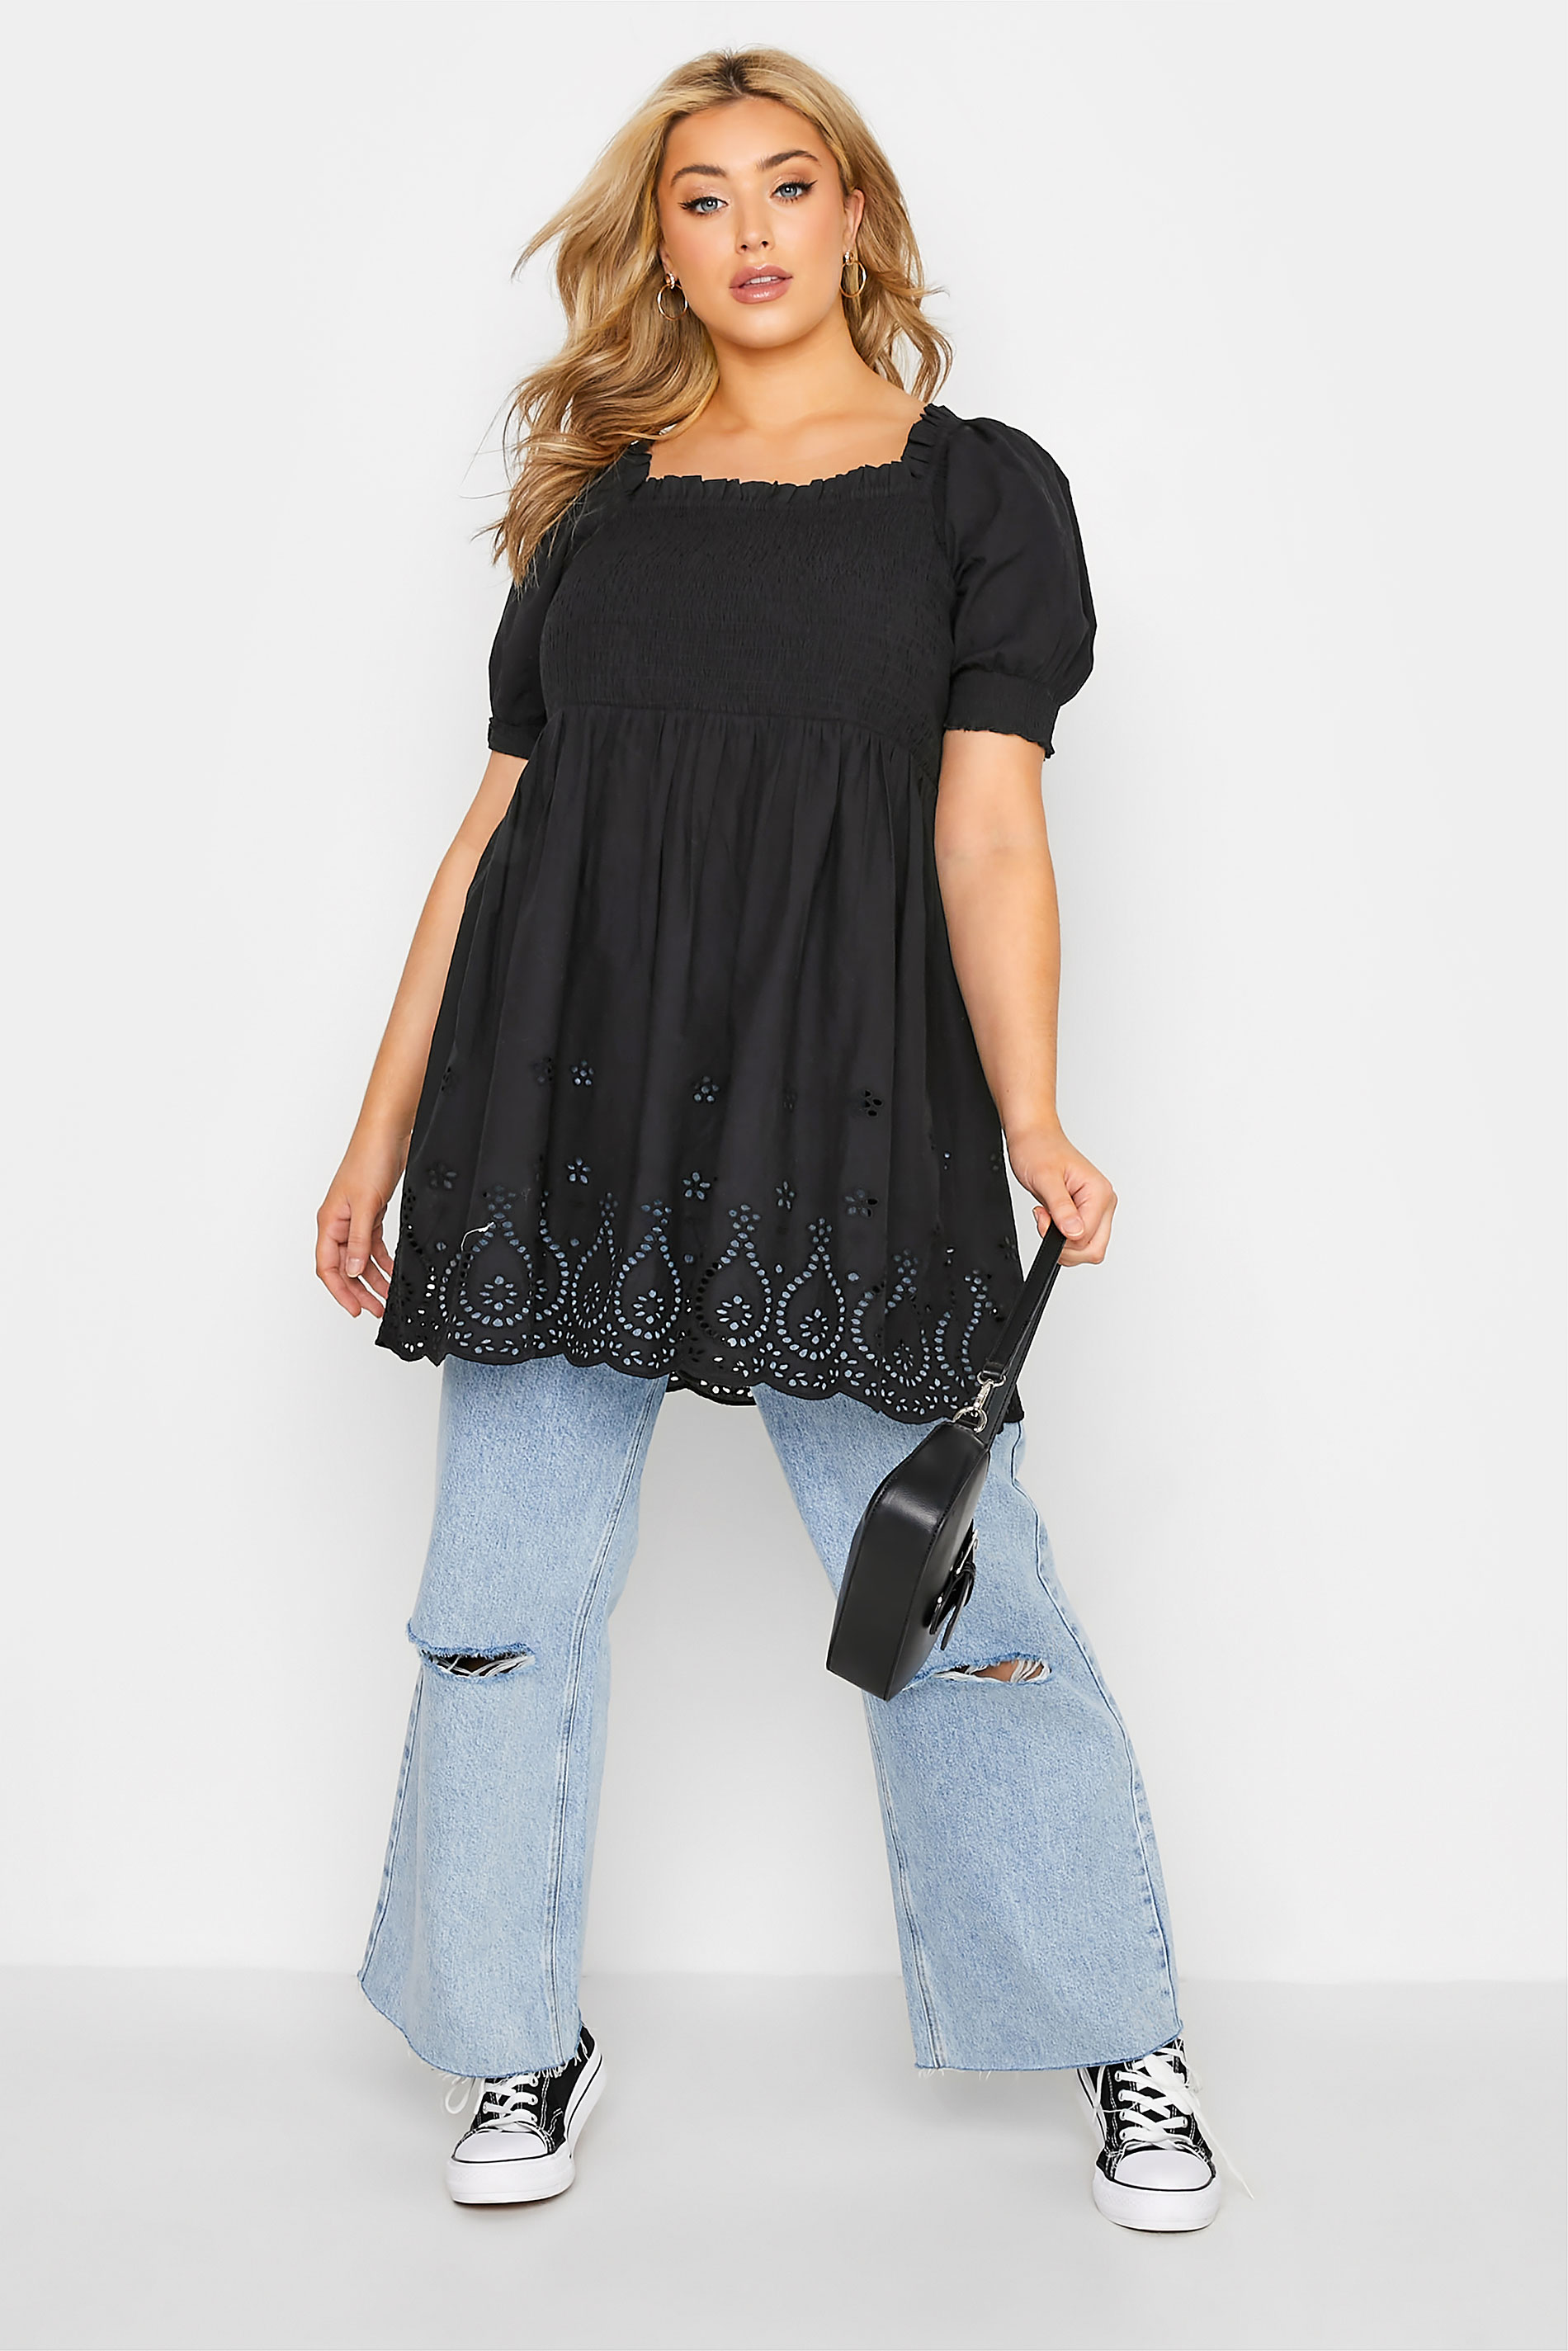 Grande taille  Tops Grande taille  Tops Casual | Top Noir Broderie Anglaise Manches Courtes - CK85562